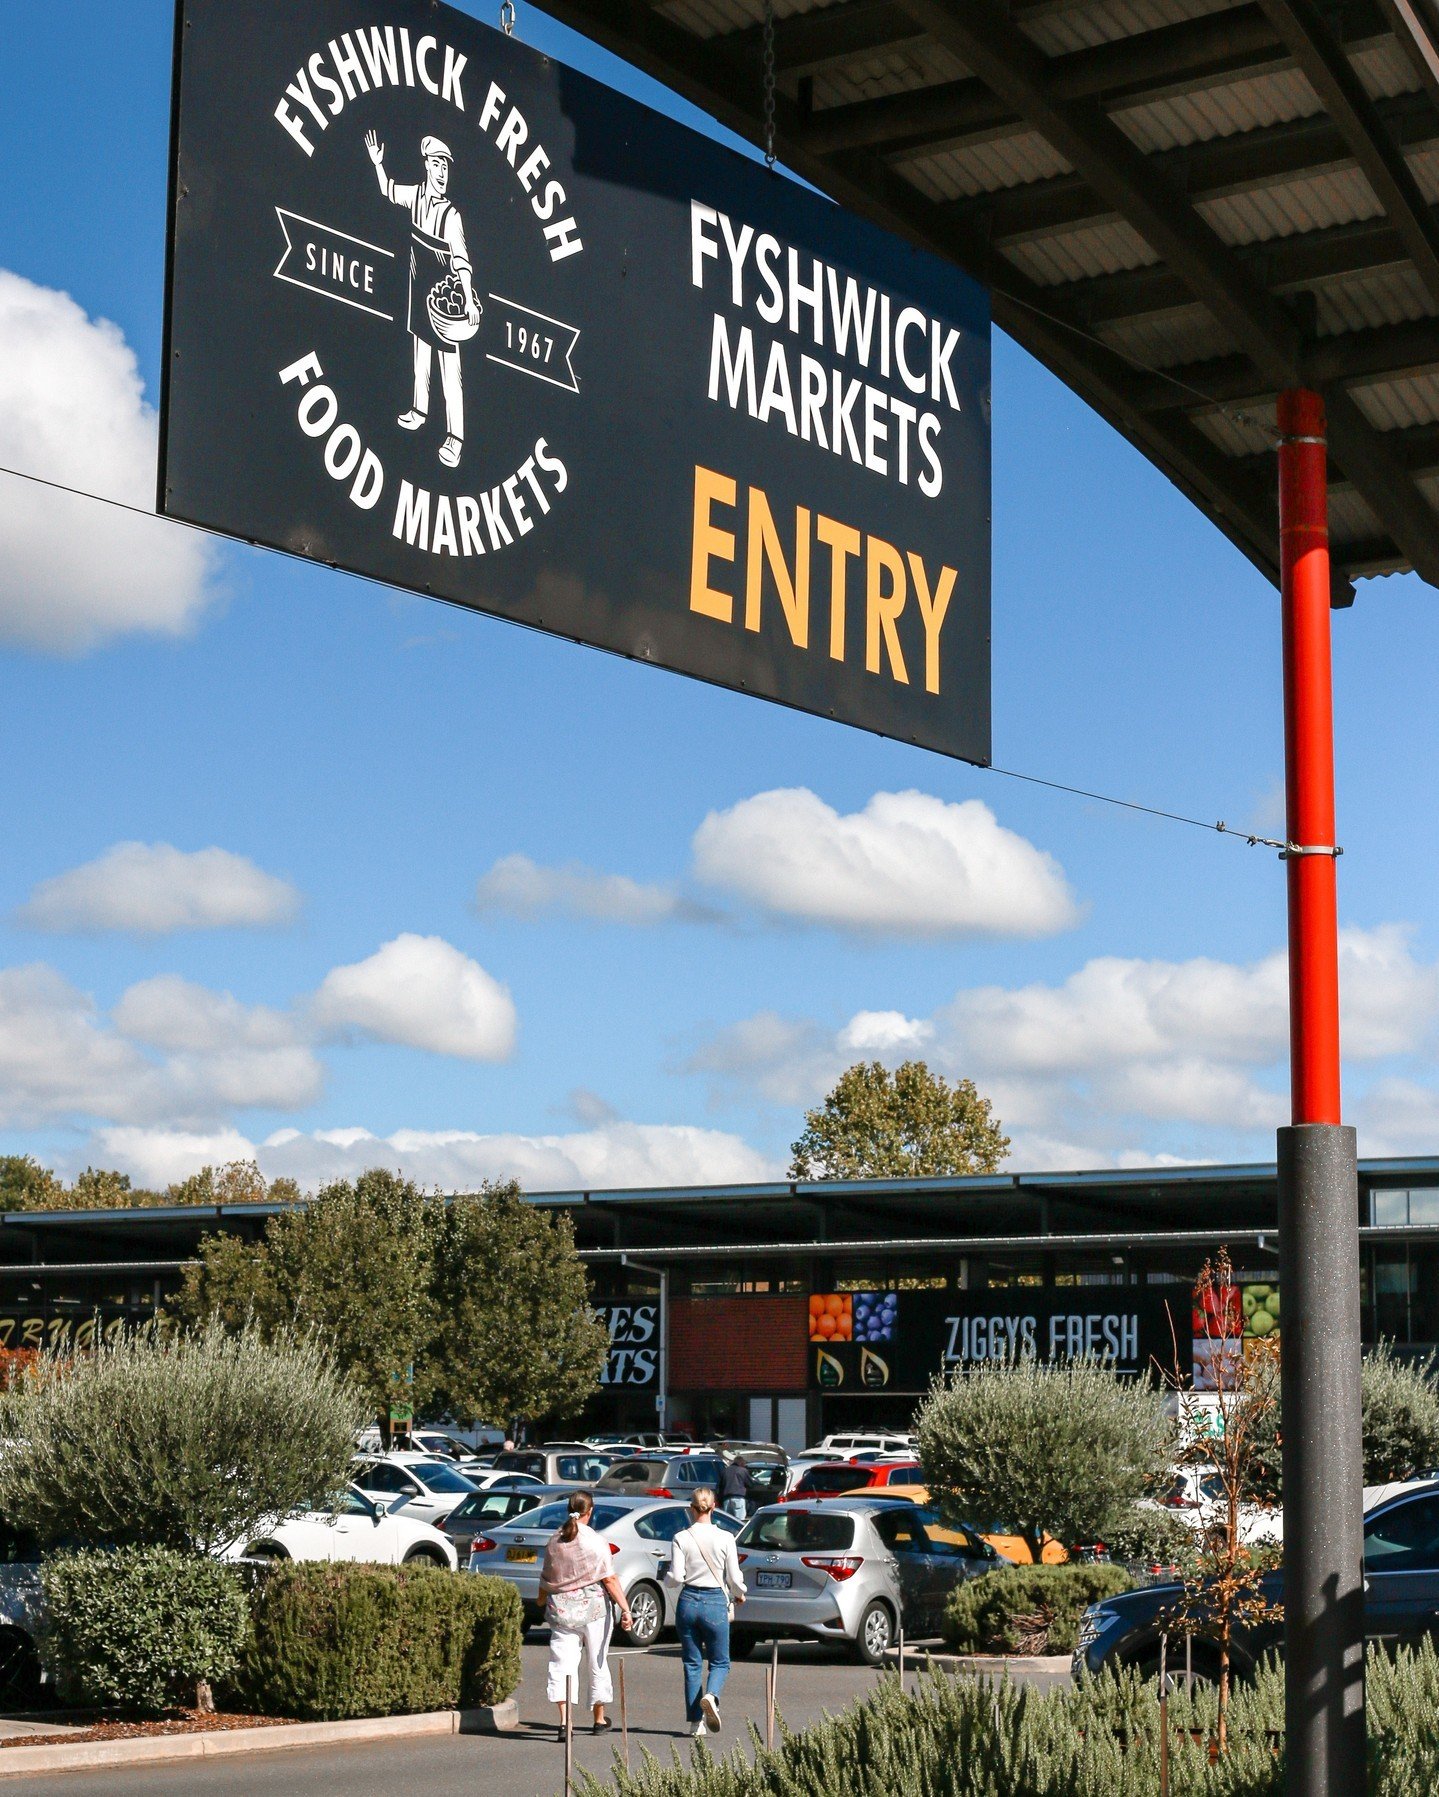 Avoid the supermarket rush and savour the freshest fruits and vegetables this weekend at the Fyshwick Markets 🥕🍐🍏. 

We're conveniently located near Canberra Ave and King's Highway, making it a perfect spot to enjoy a cup of coffee, leisurely shop